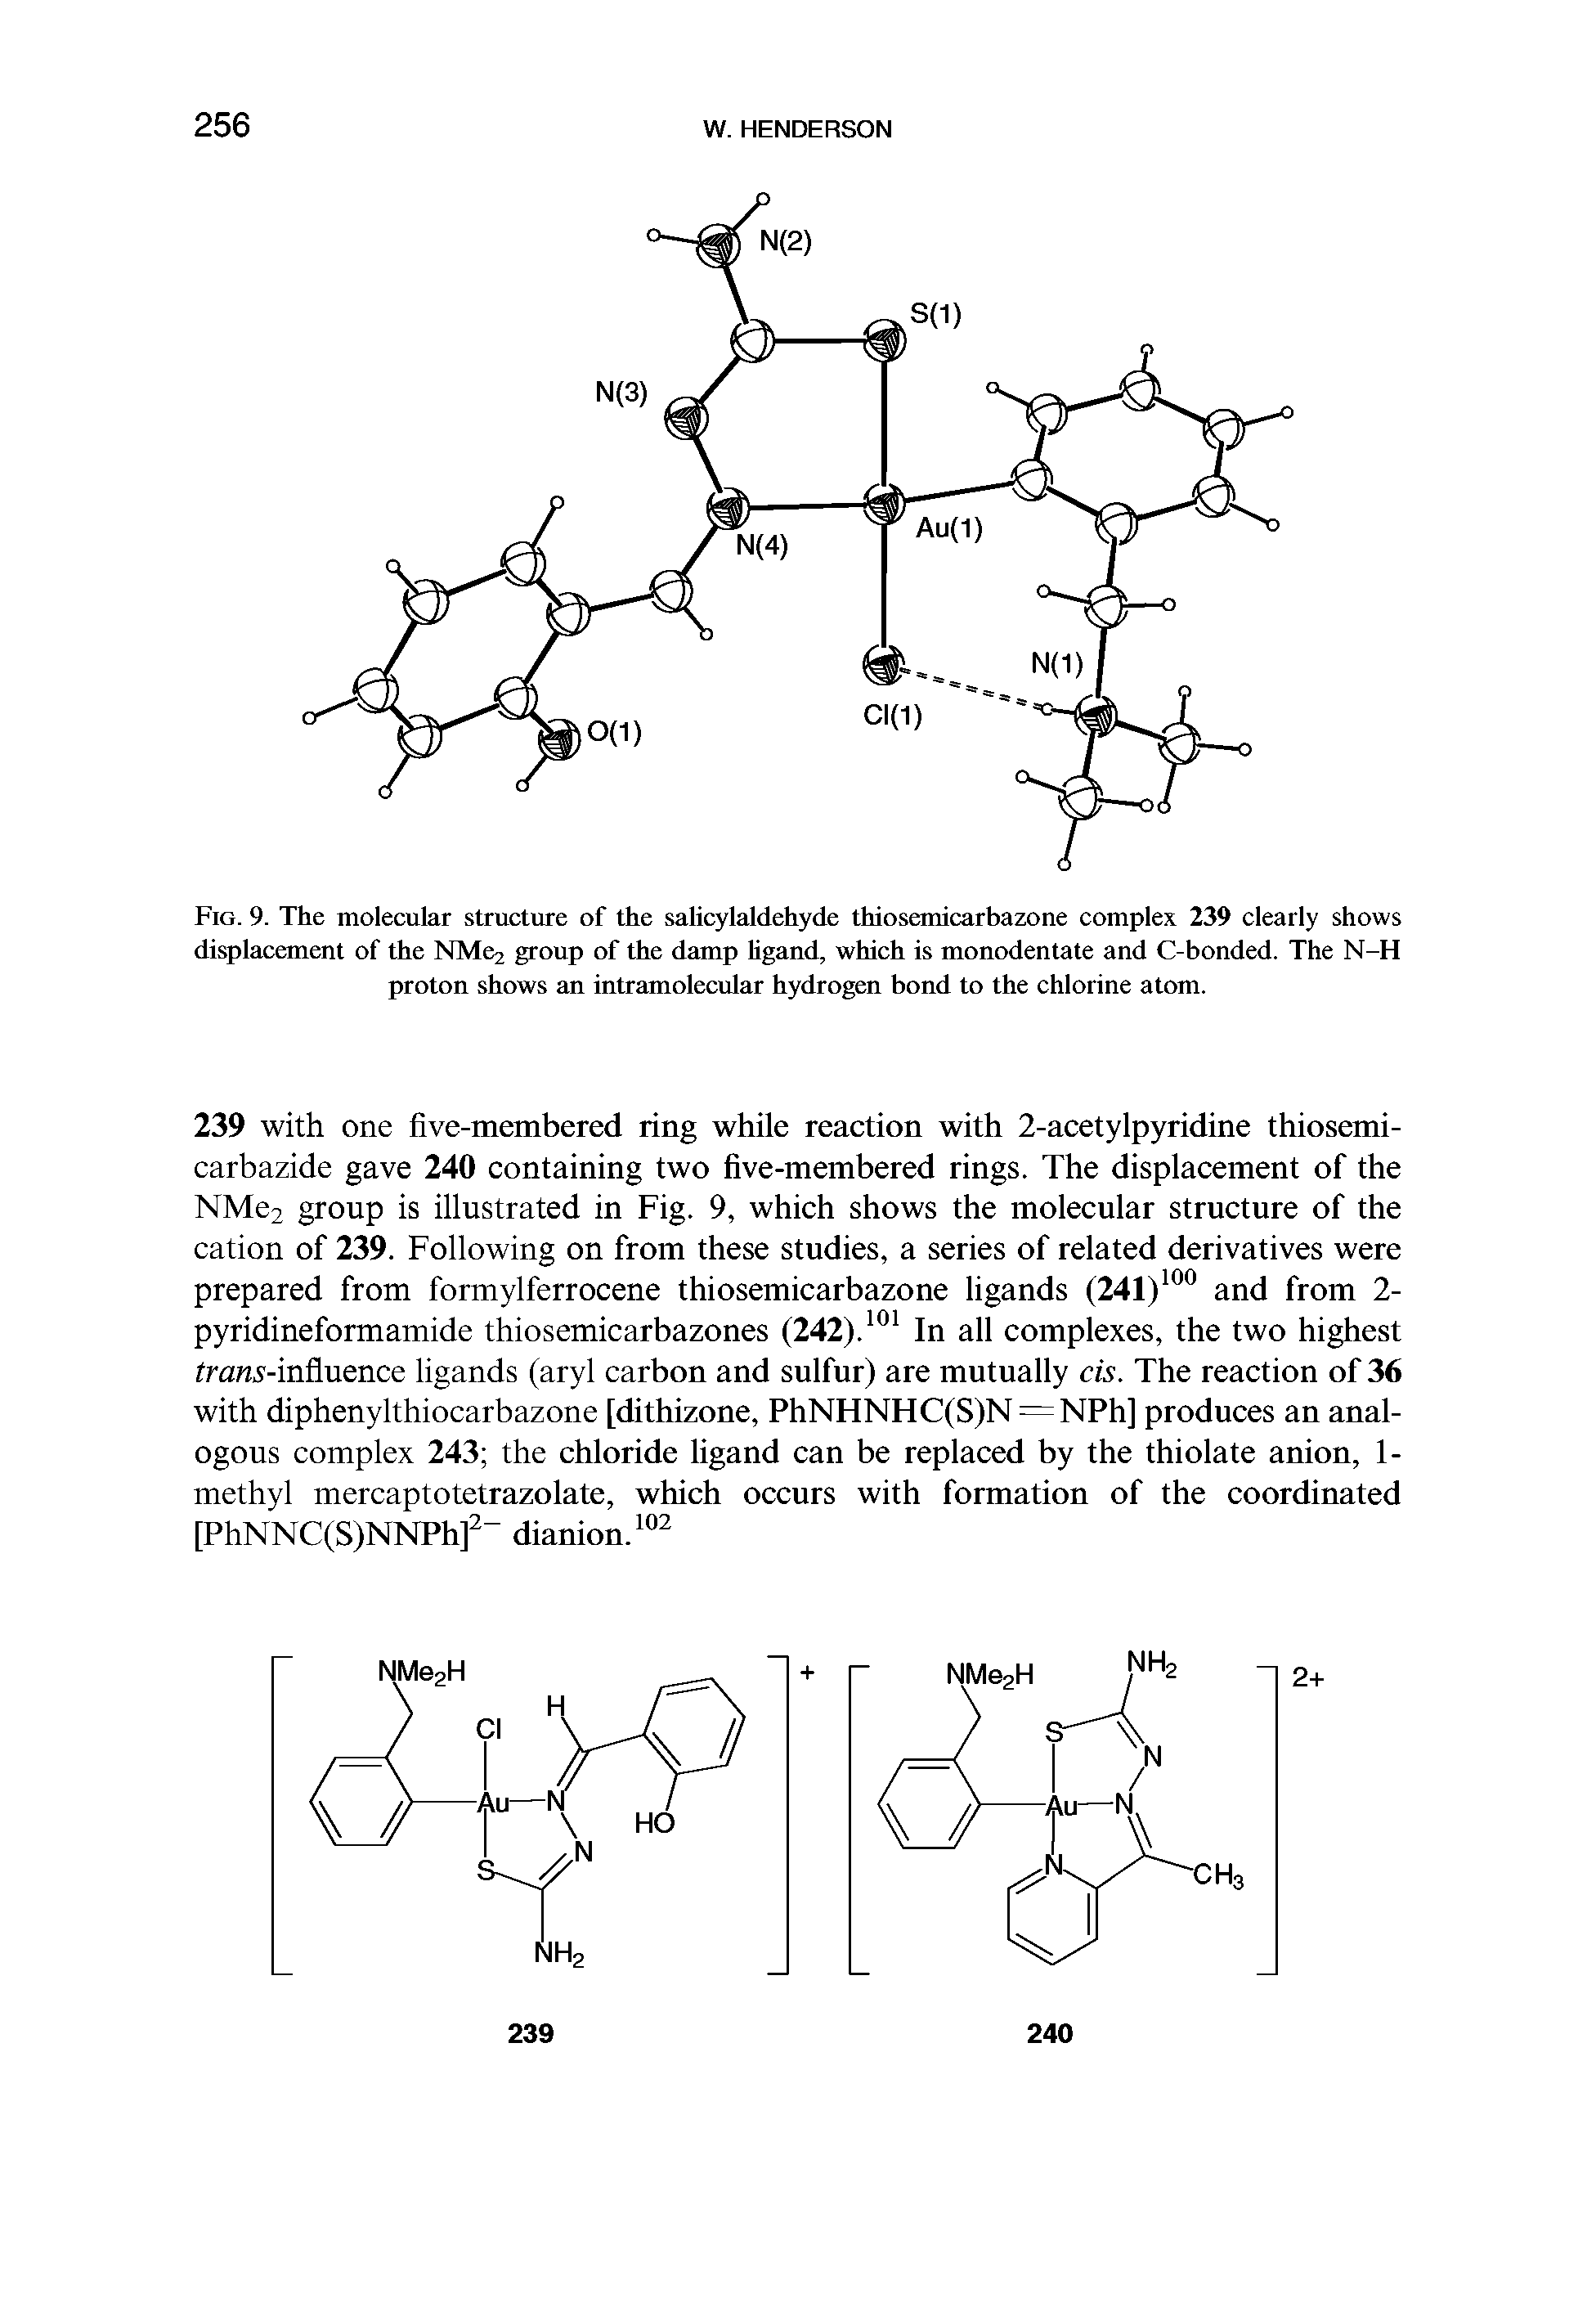 Fig. 9. The molecular structure of the salicylaldehyde thiosemicarbazone complex 239 clearly shows displacement of the NMe2 group of the damp ligand, which is monodentate and C-bonded. The N-H proton shows an intramolecular hydrogen bond to the chlorine atom.